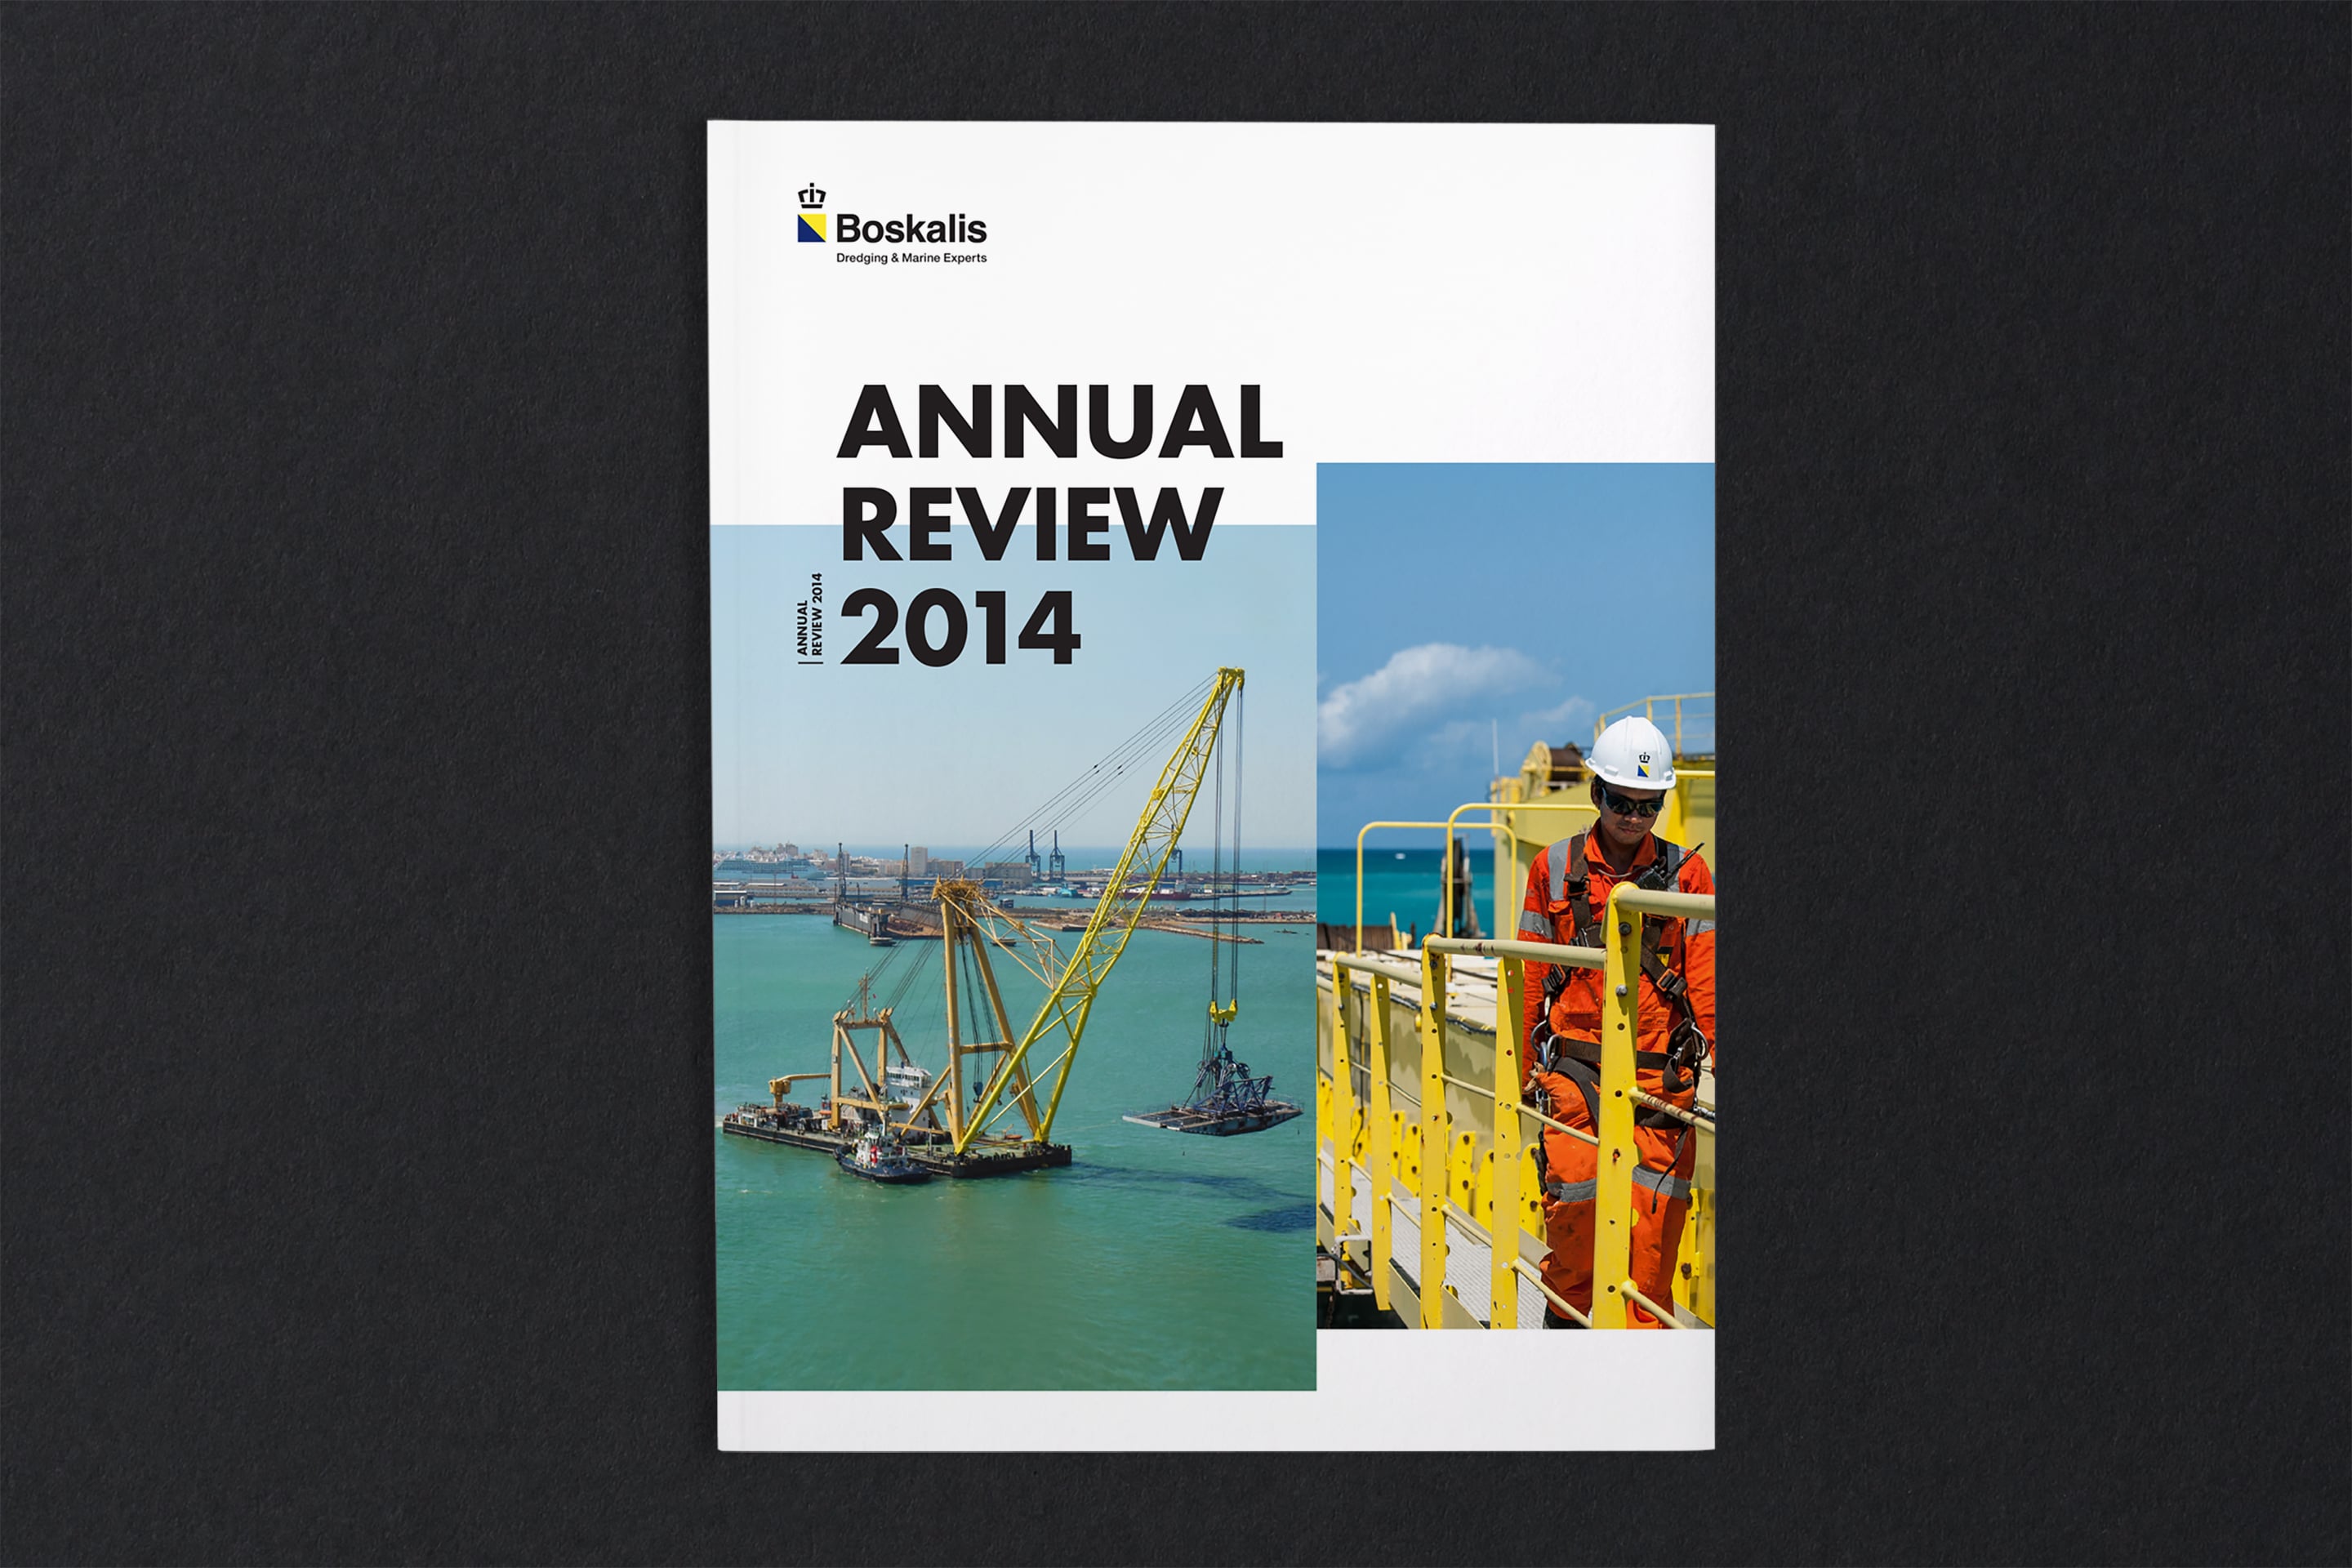 studio dumbar design visual brand identity for Boskalis the leading dredging and marine experts Annual Review print design